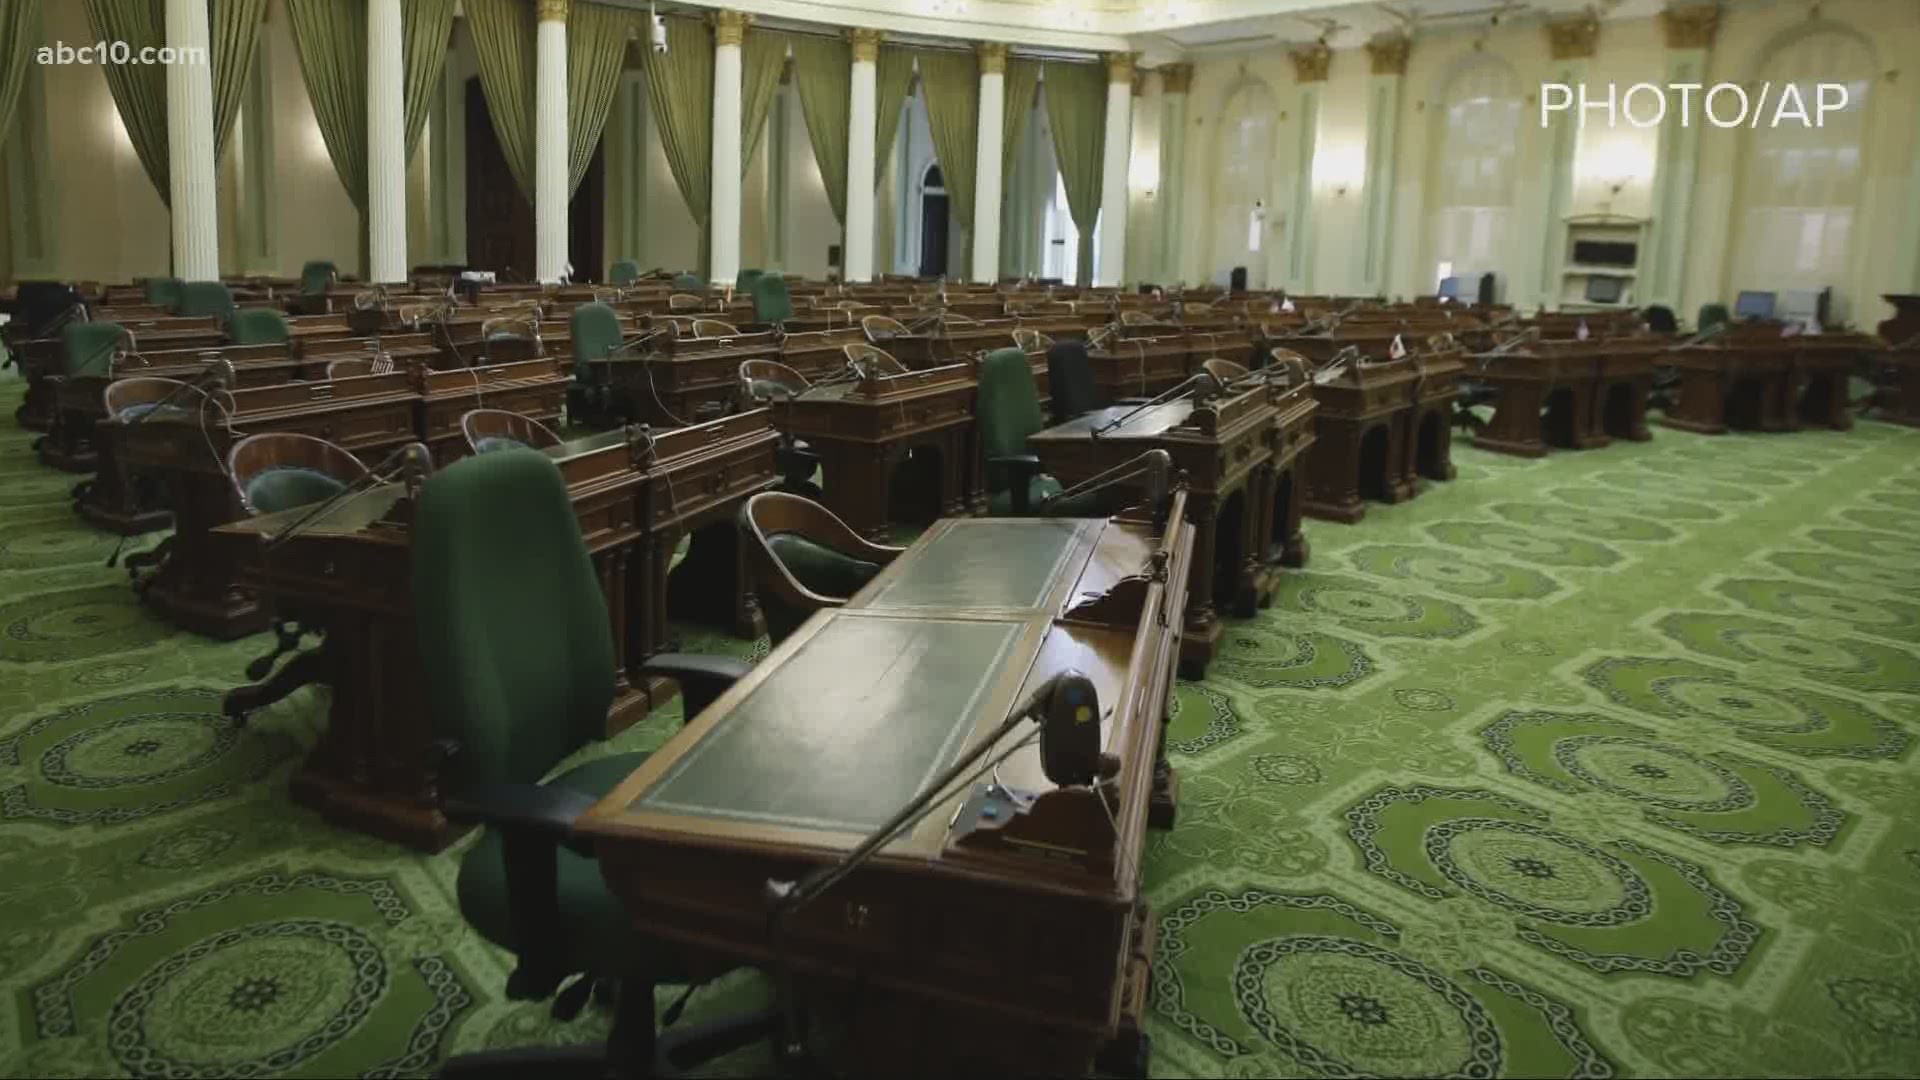 Some California lawmakers are set to return to the Capitol after more than a month away.